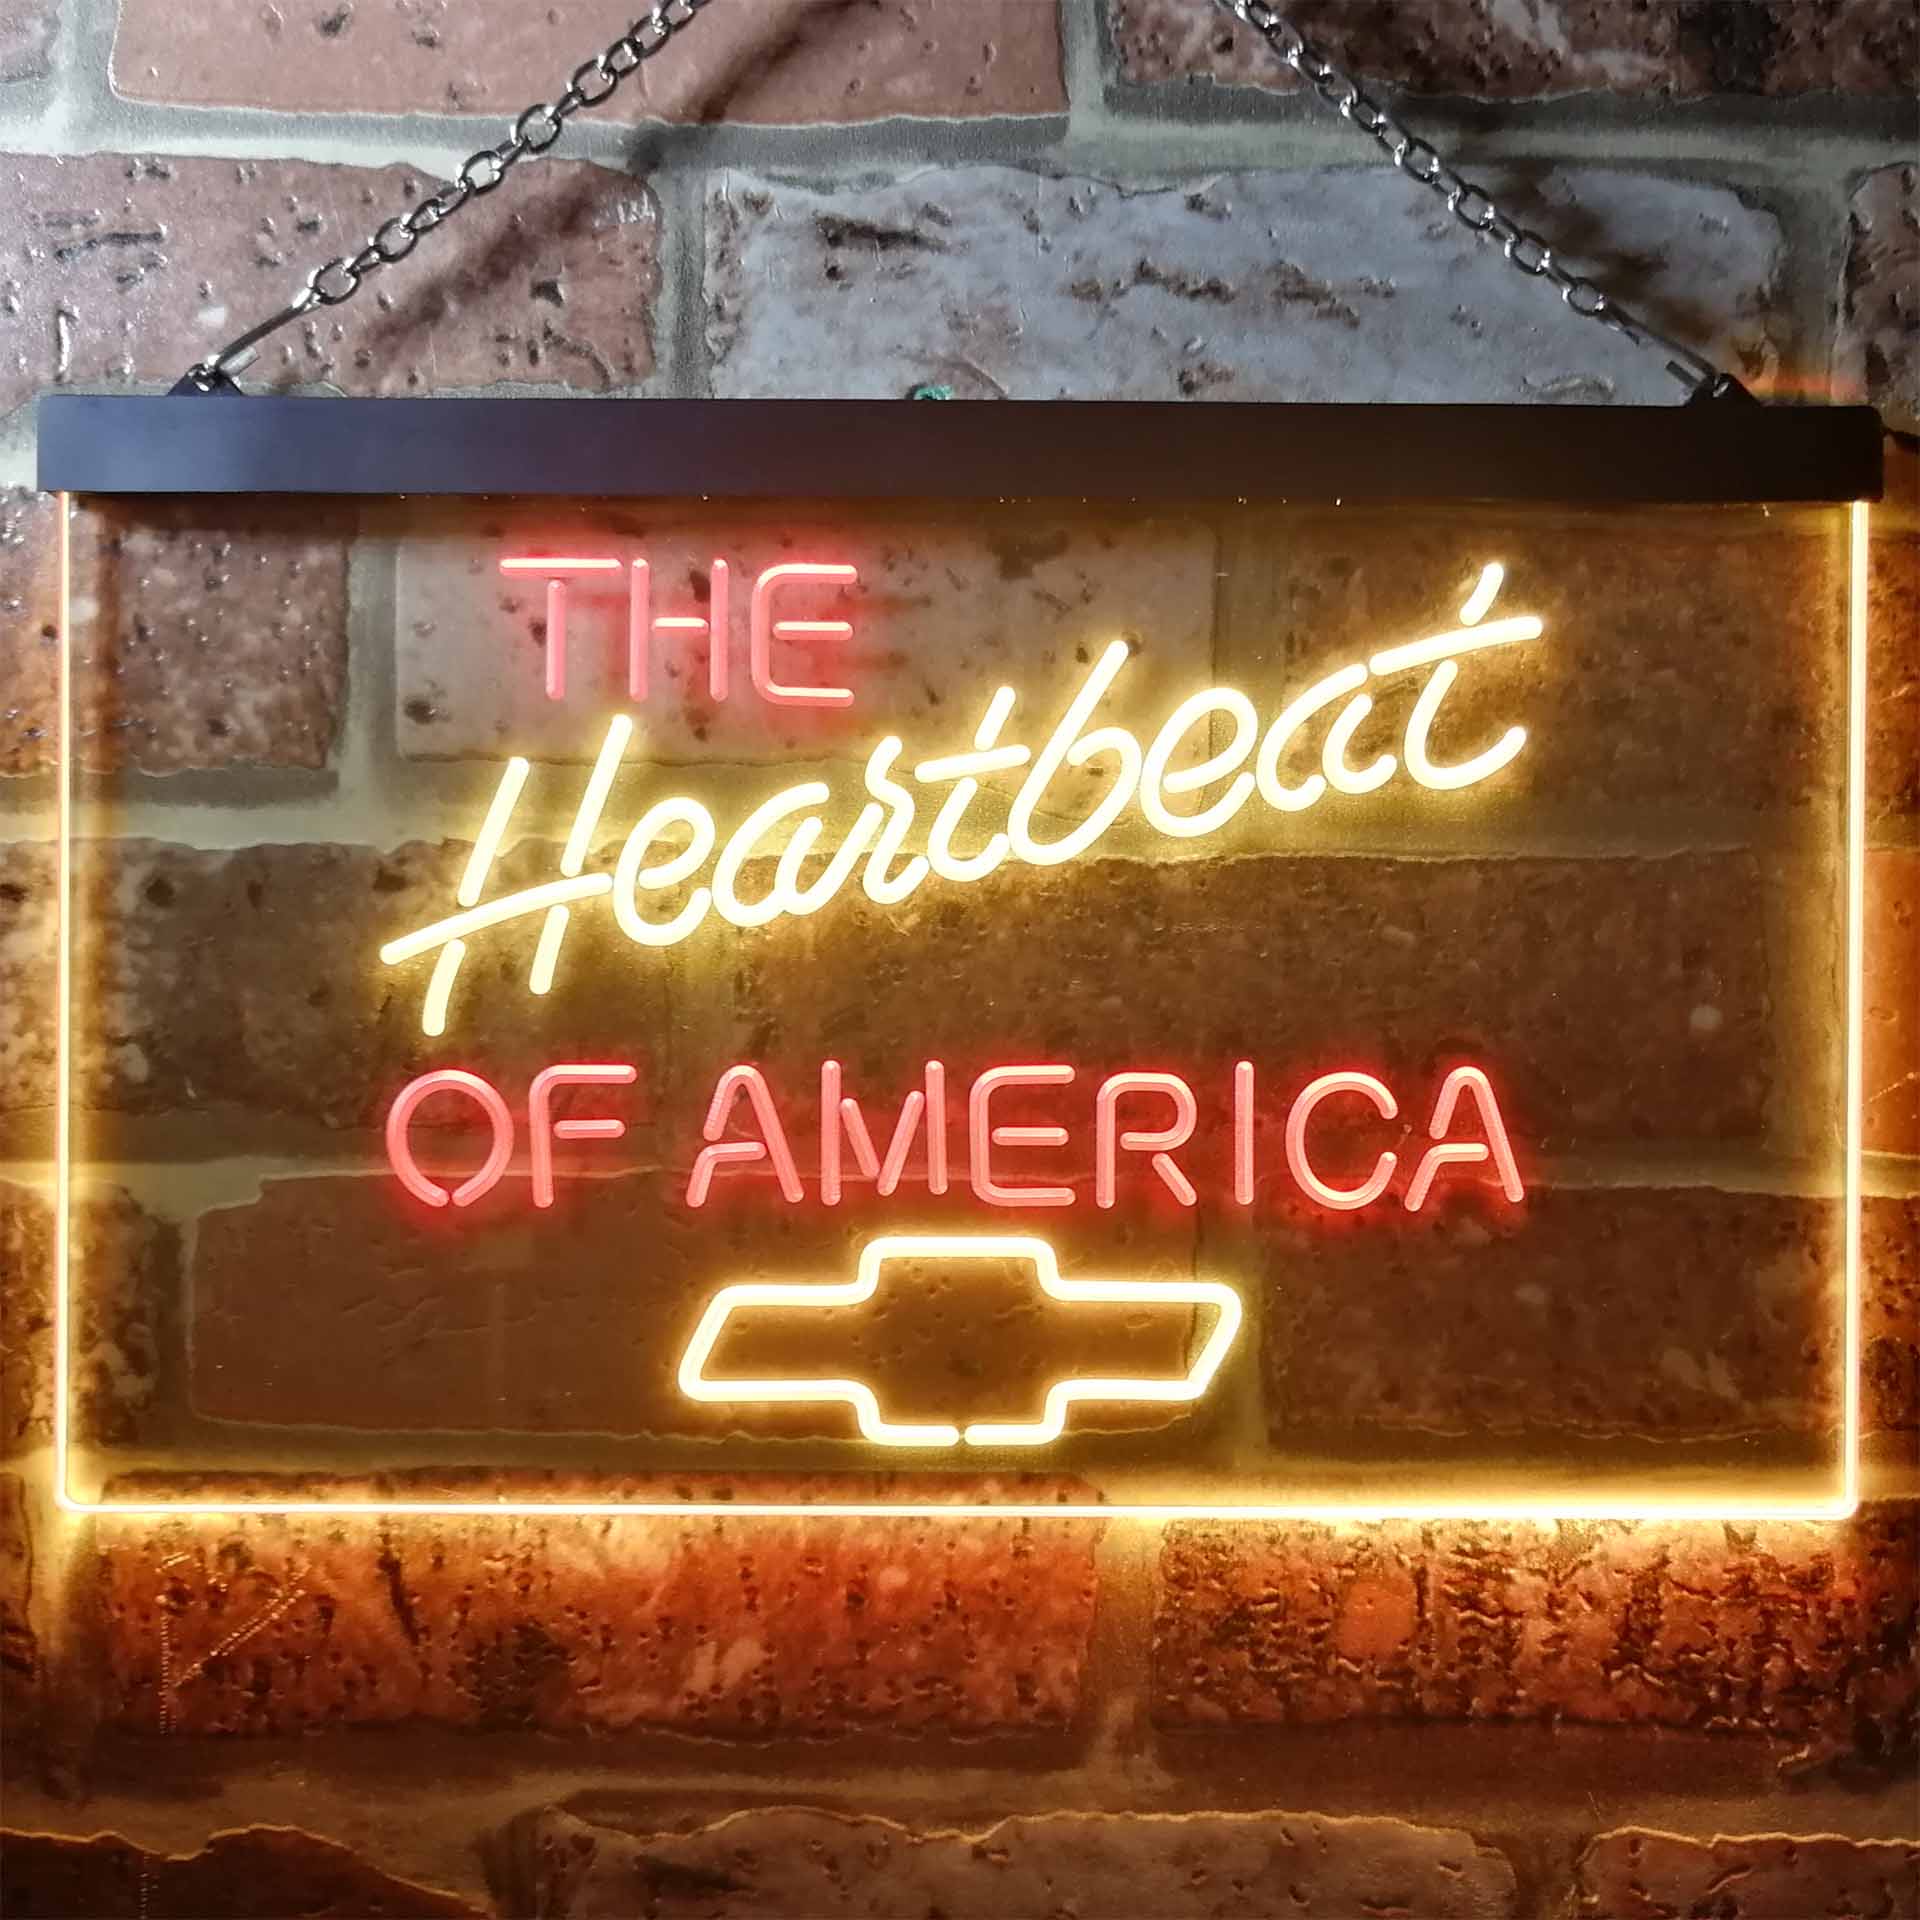 Chevrolet Heartbeat of America Neon LED Sign